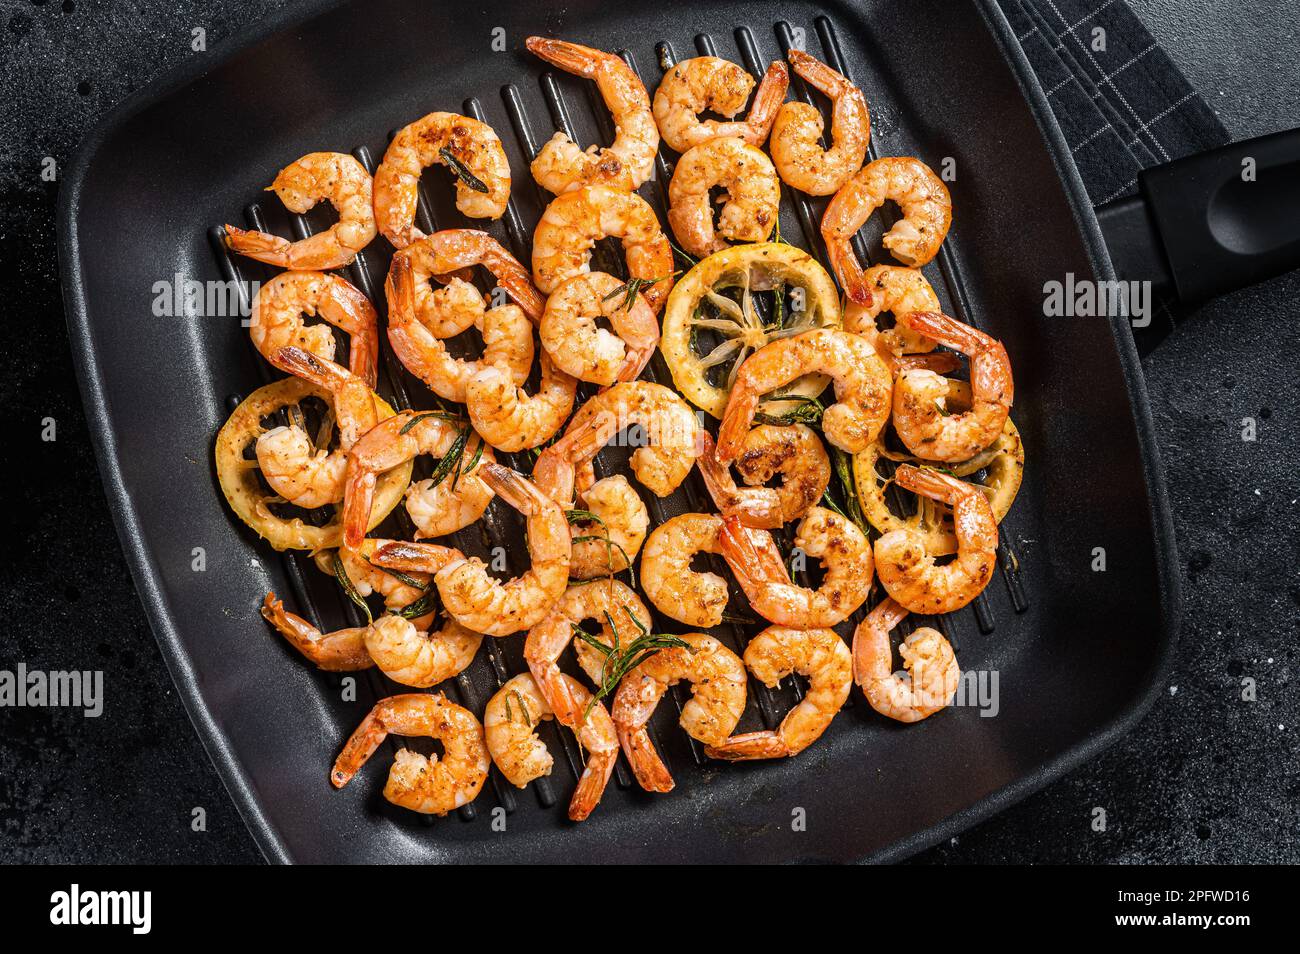 https://c8.alamy.com/comp/2PFWD16/roasted-prawns-shrimps-with-herbs-on-a-grill-skillet-black-background-top-view-2PFWD16.jpg